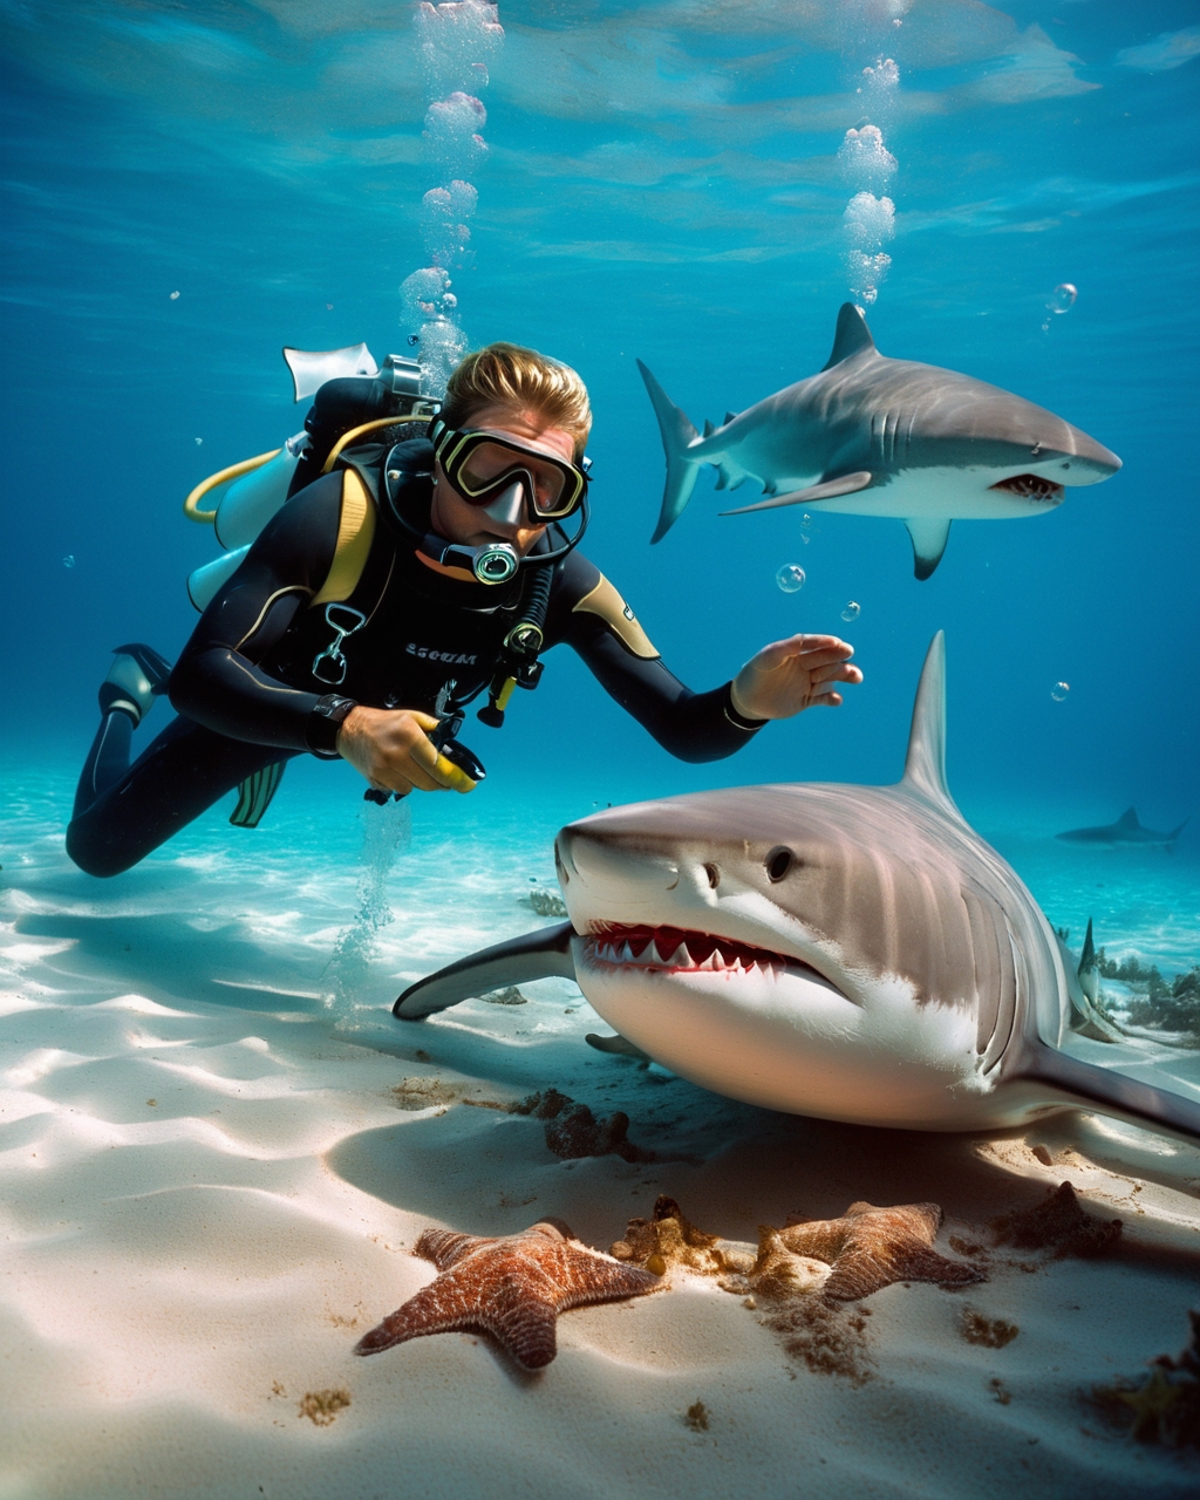 A woman with a shark diving gear posing with a shark.